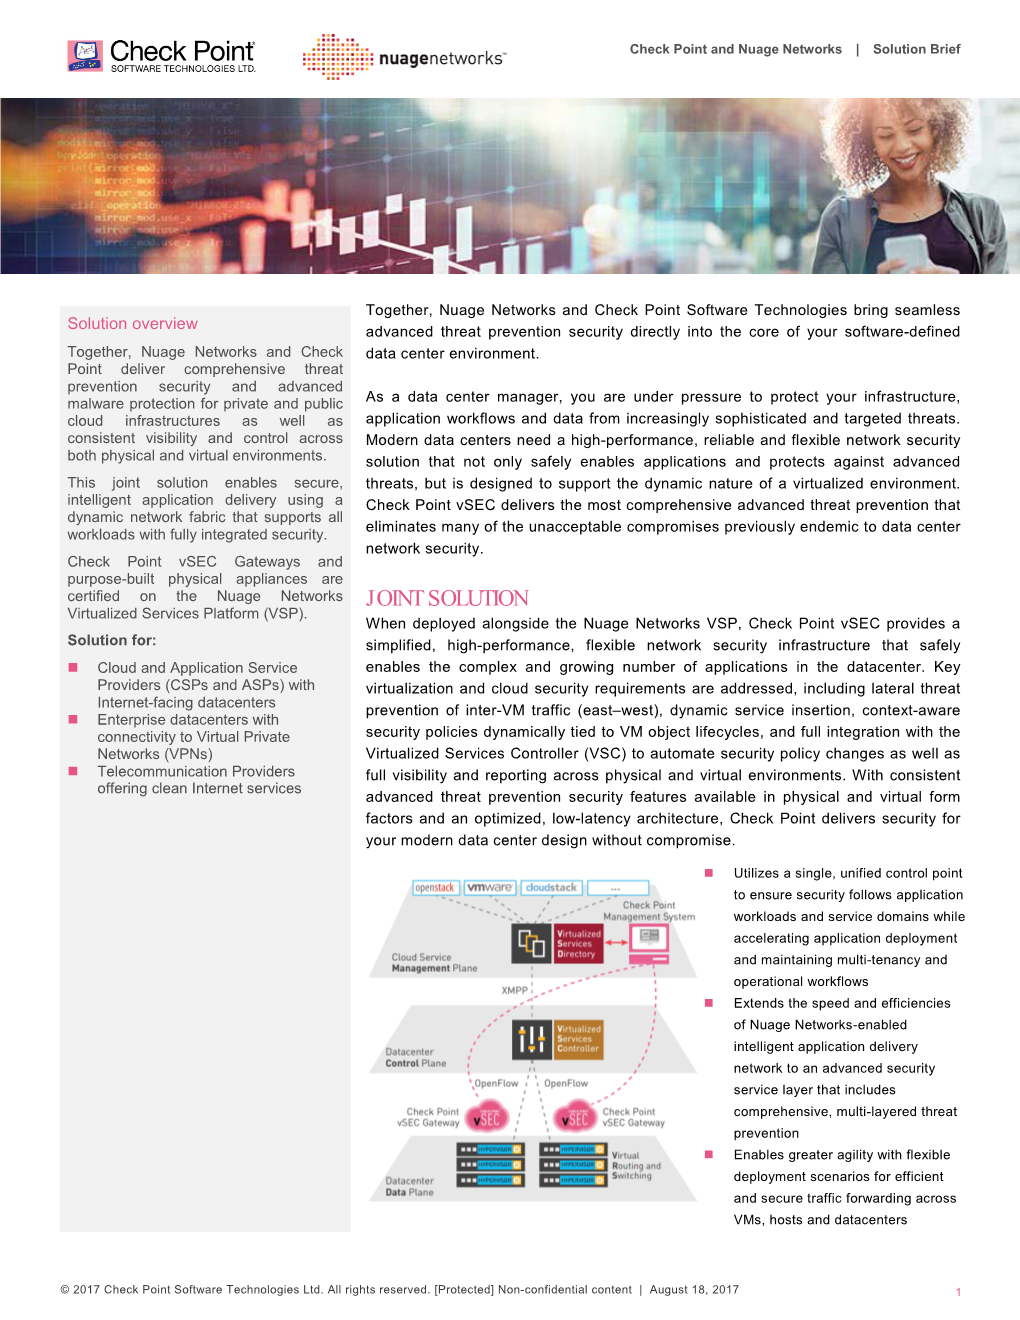 Check Point Nuage Networks Solution Brief